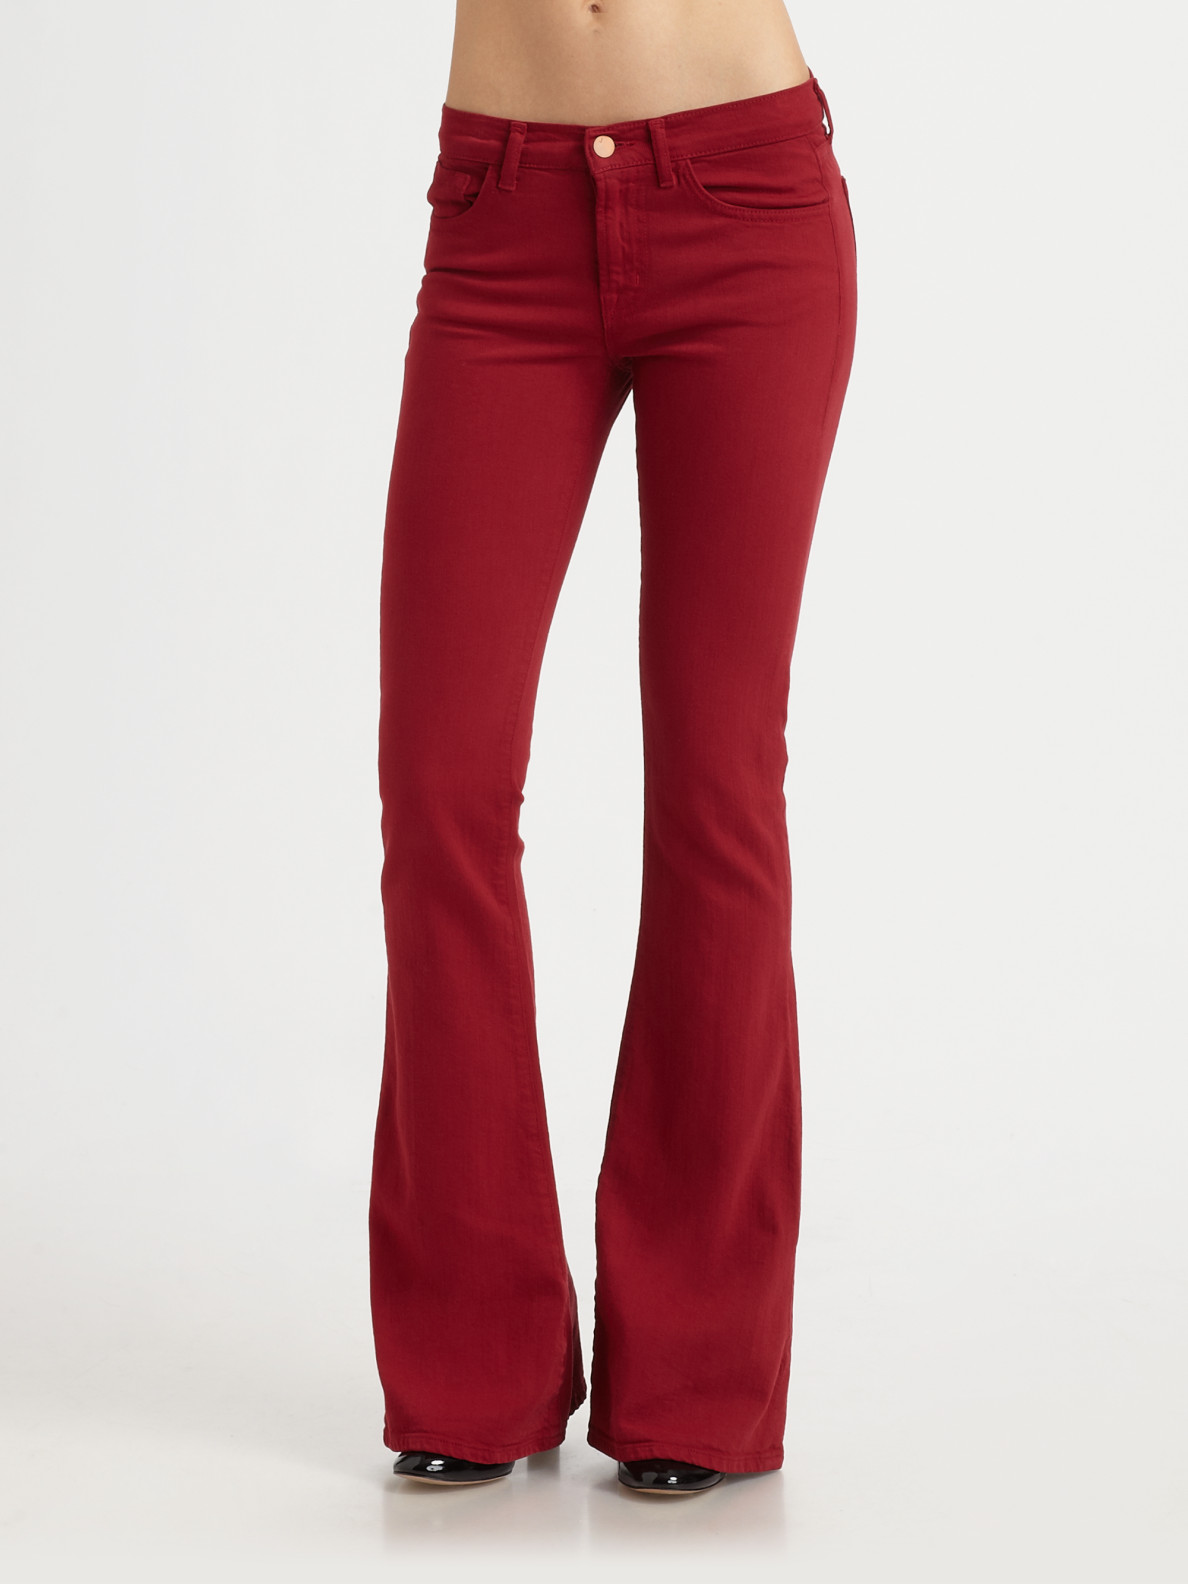 Lyst - J Brand Martini Mid-rise Flare Pants in Brown